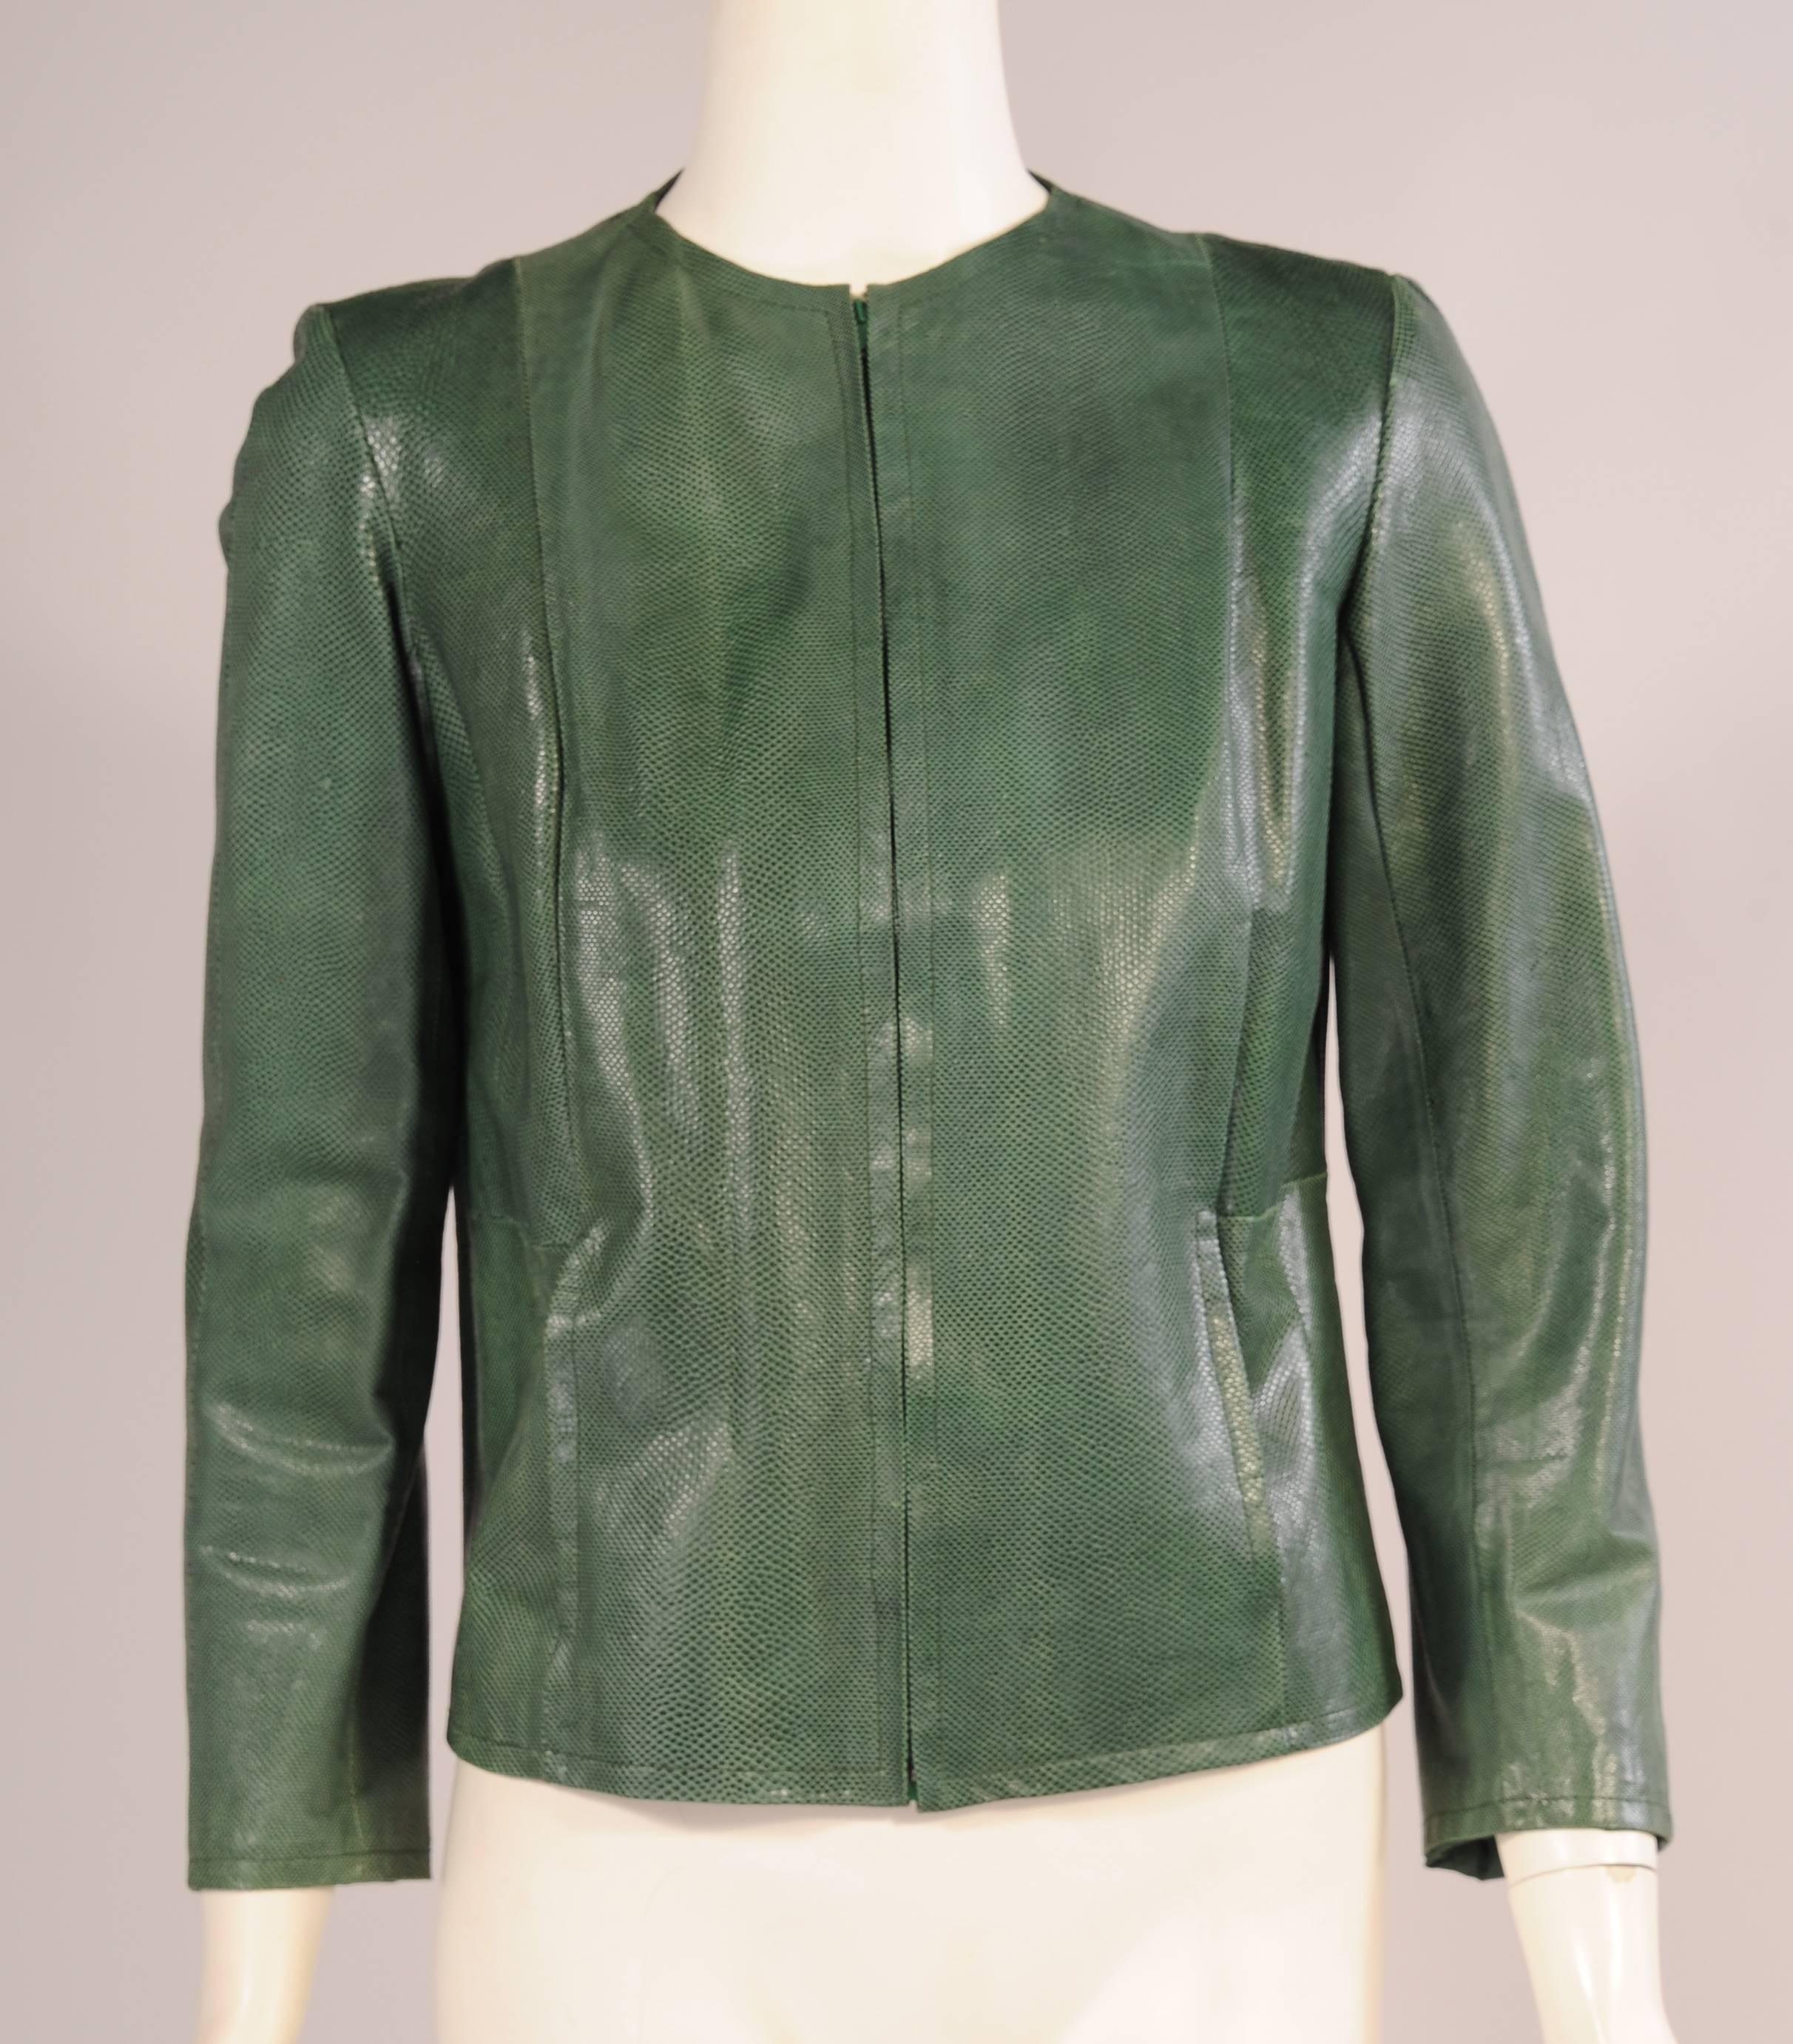 This spare and elegant jacket from Halston is collarless with a center front metal zipper and two pockets in the seams. Made from supple dyed green karung snakeskin it is in excellent condition. It is fully lined with matching green